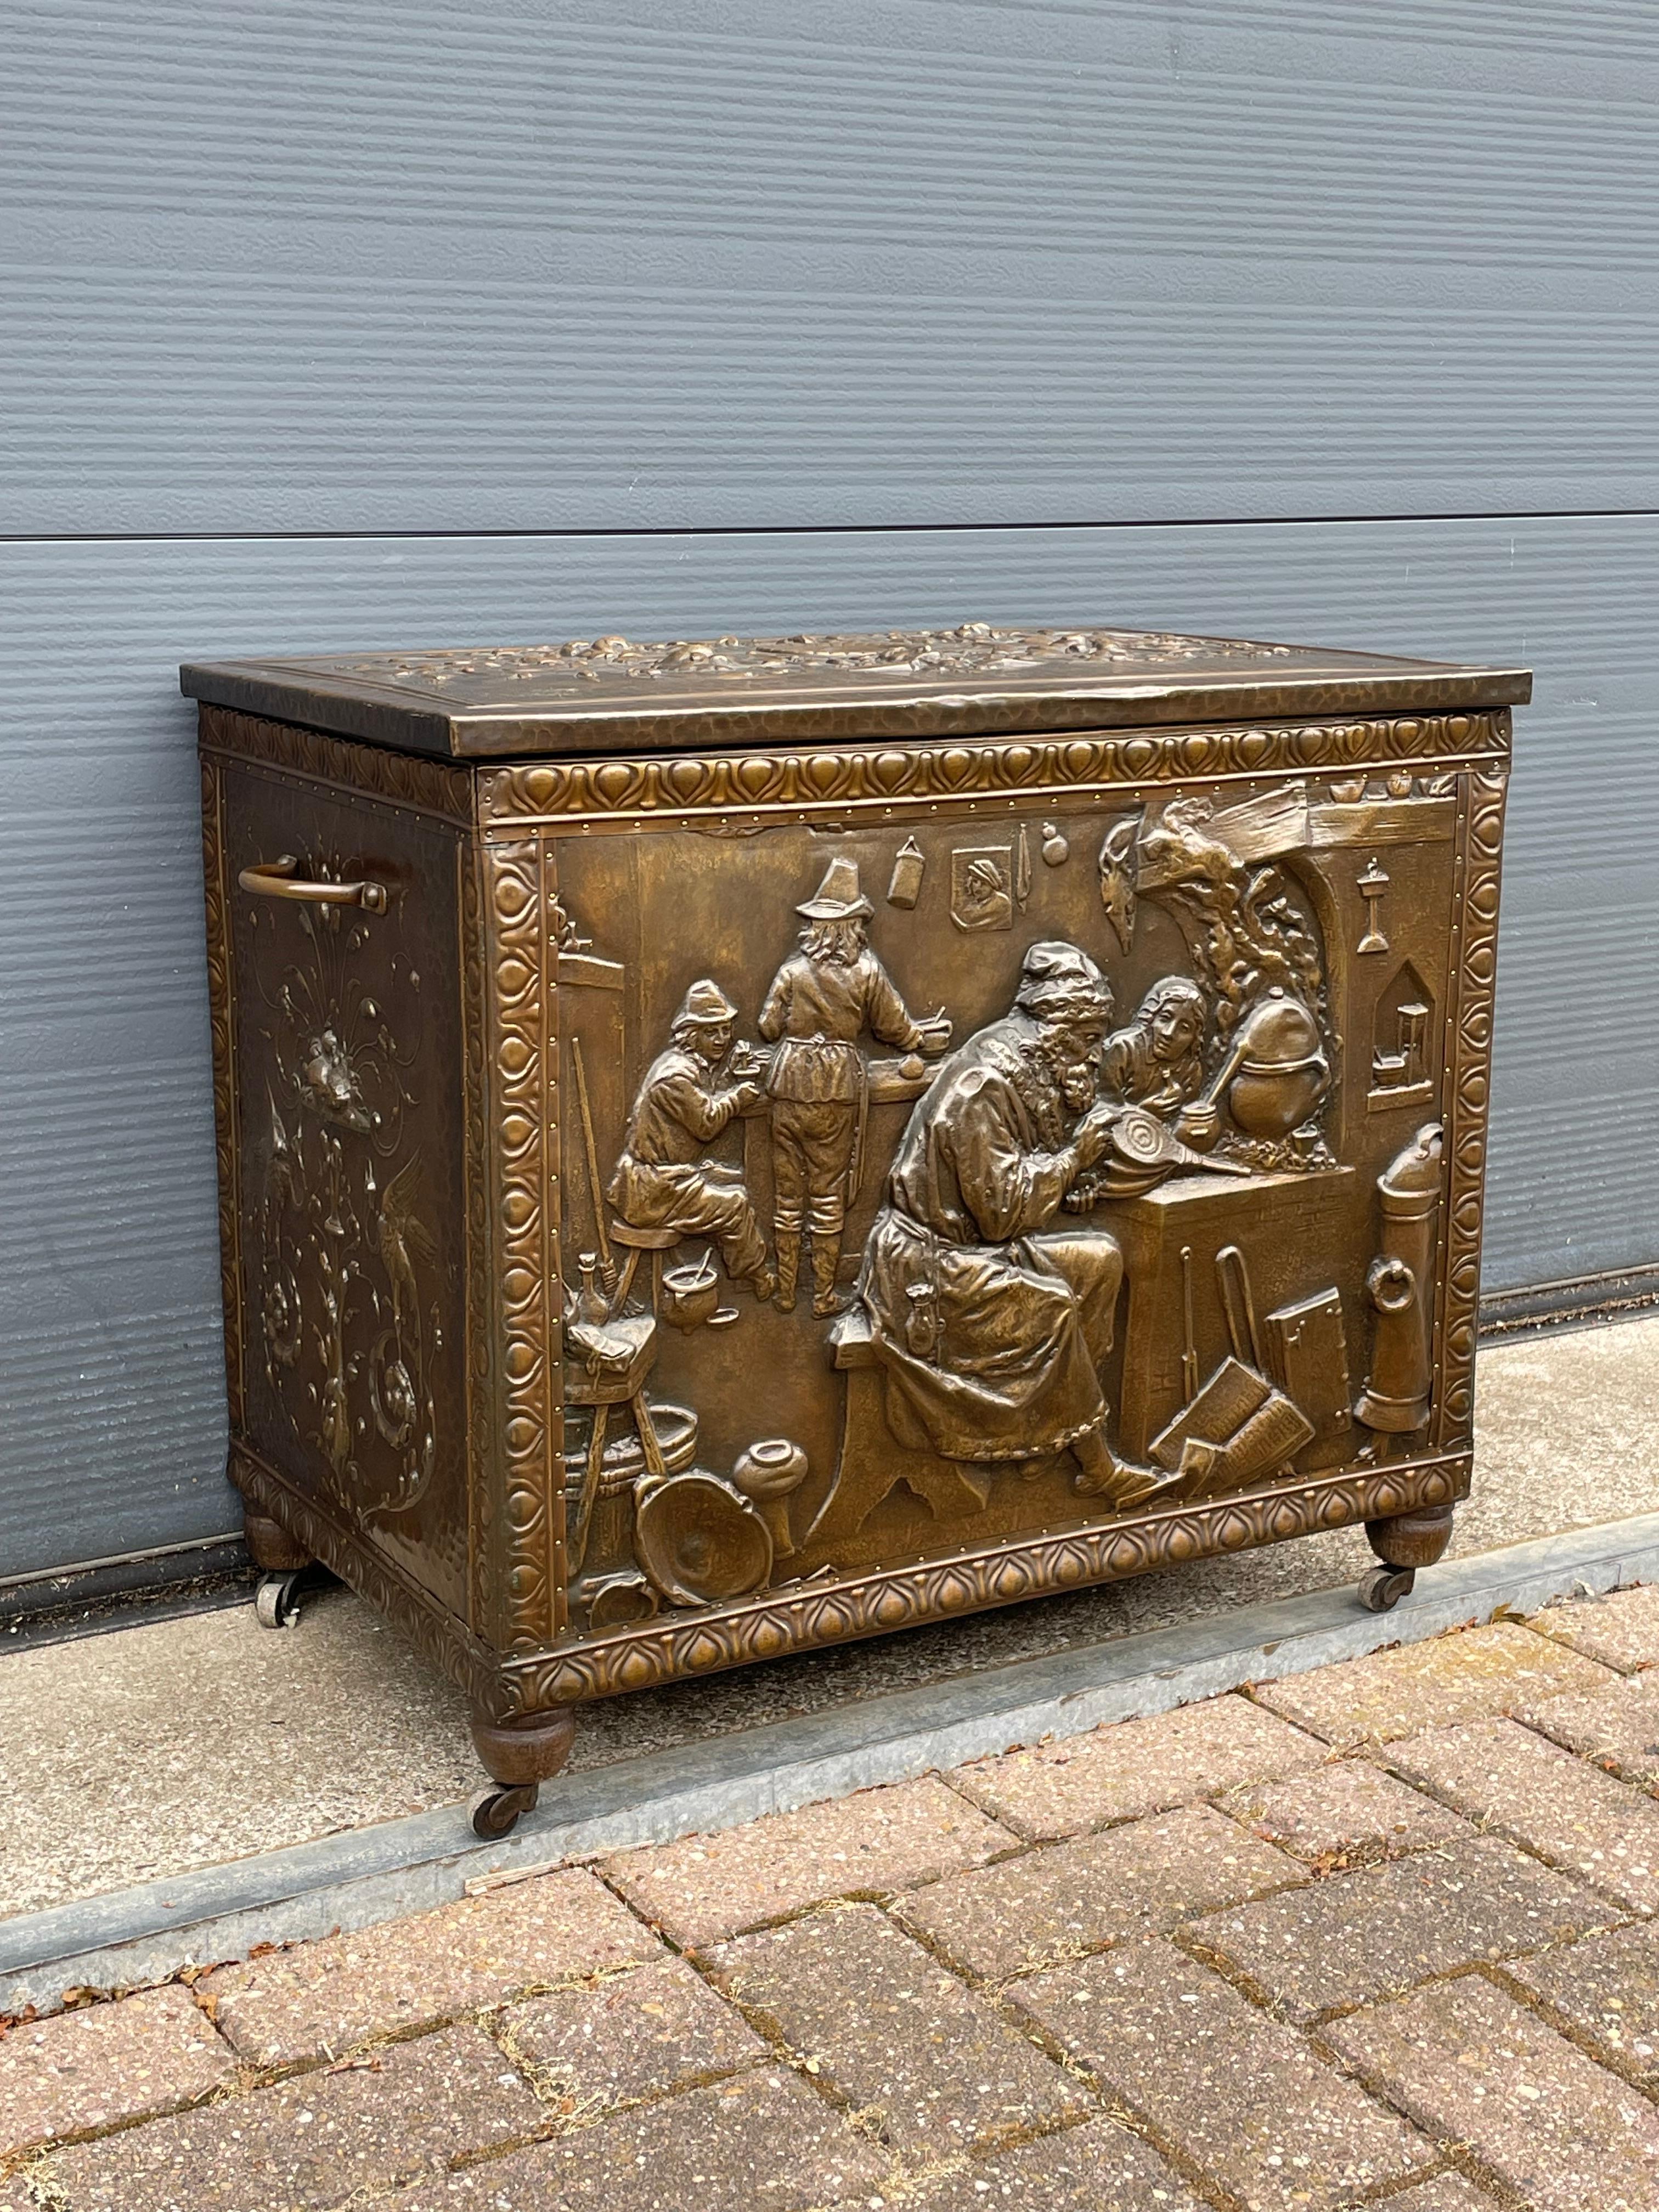 All handcrafted and rare, brass firewood bucket by A. Arens of Antwerp, depicting the alchemist.

Only if you were a very wealthy person in Europe in the late 1800s, would you be able to afford this large, impressive and all-handcrafted, chest-like